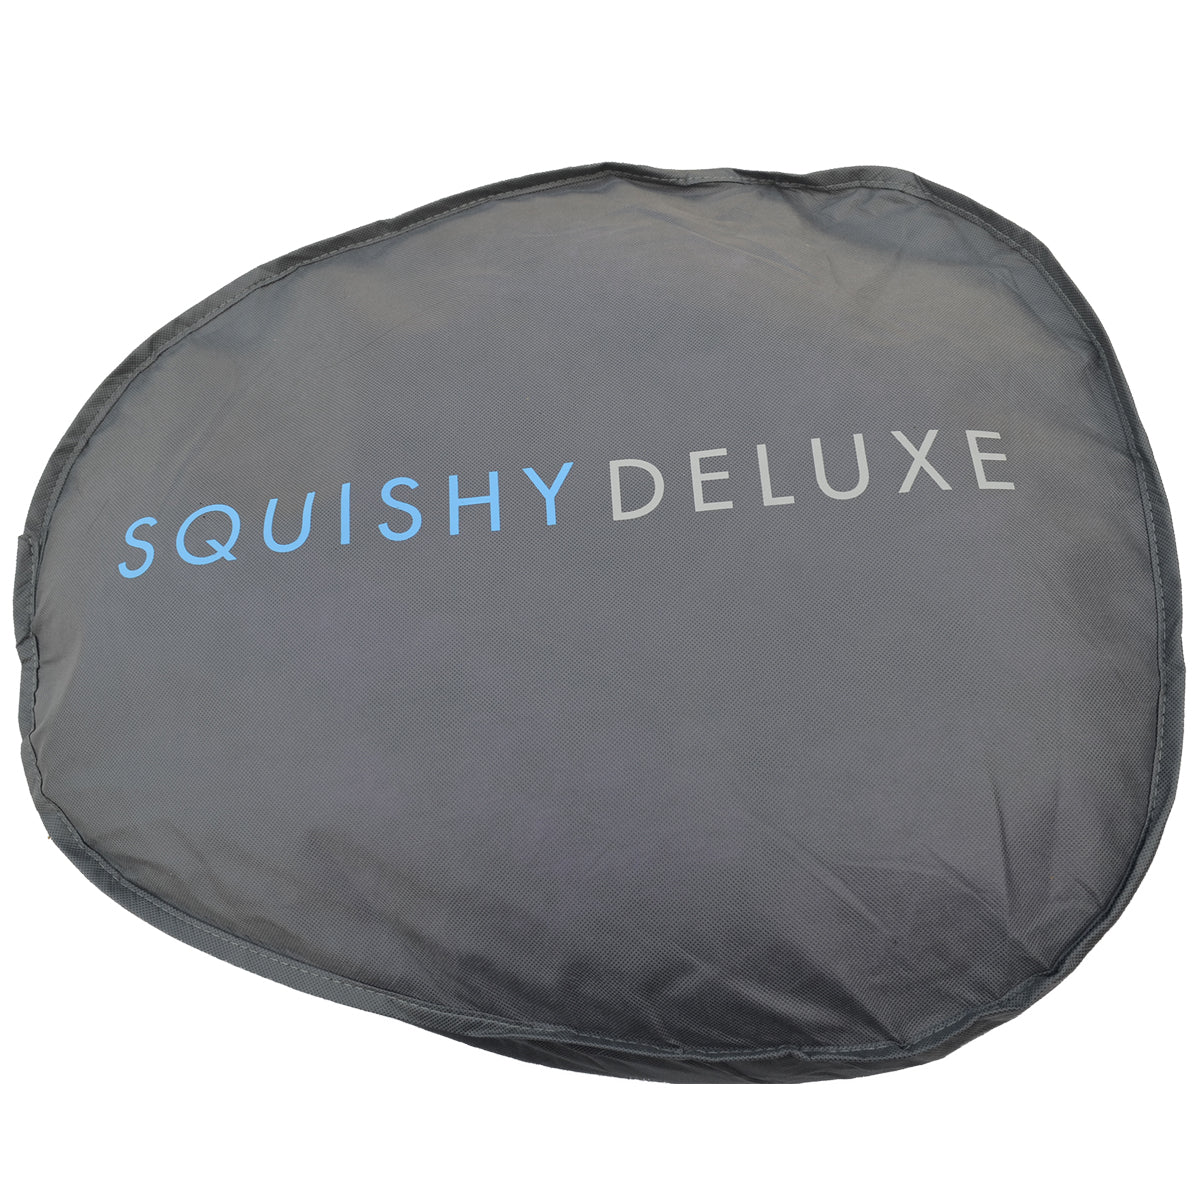 Squishy Deluxe Microbead Body Pillow with Removable Cover - Grey